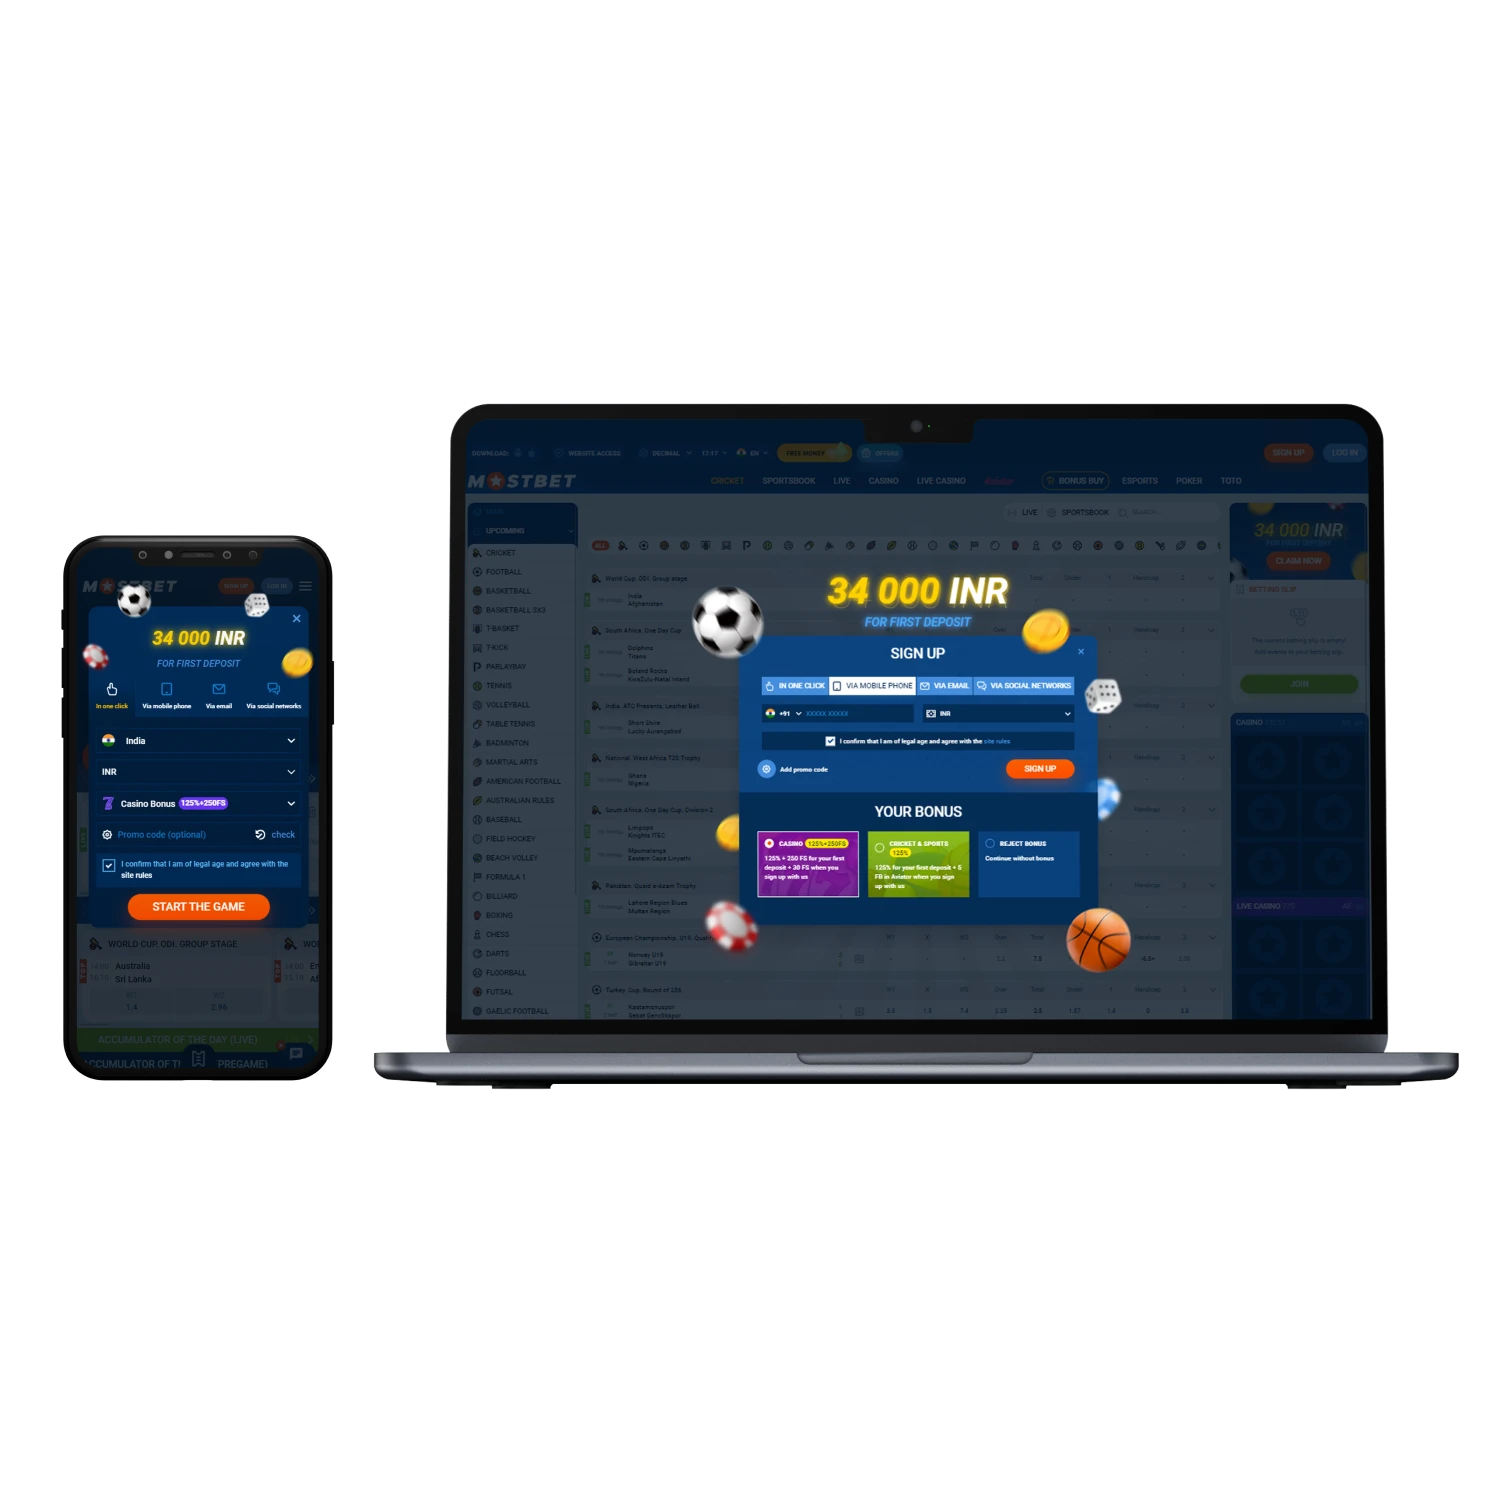 Register and verify your new account Mostbet on the official website or via mobile app.